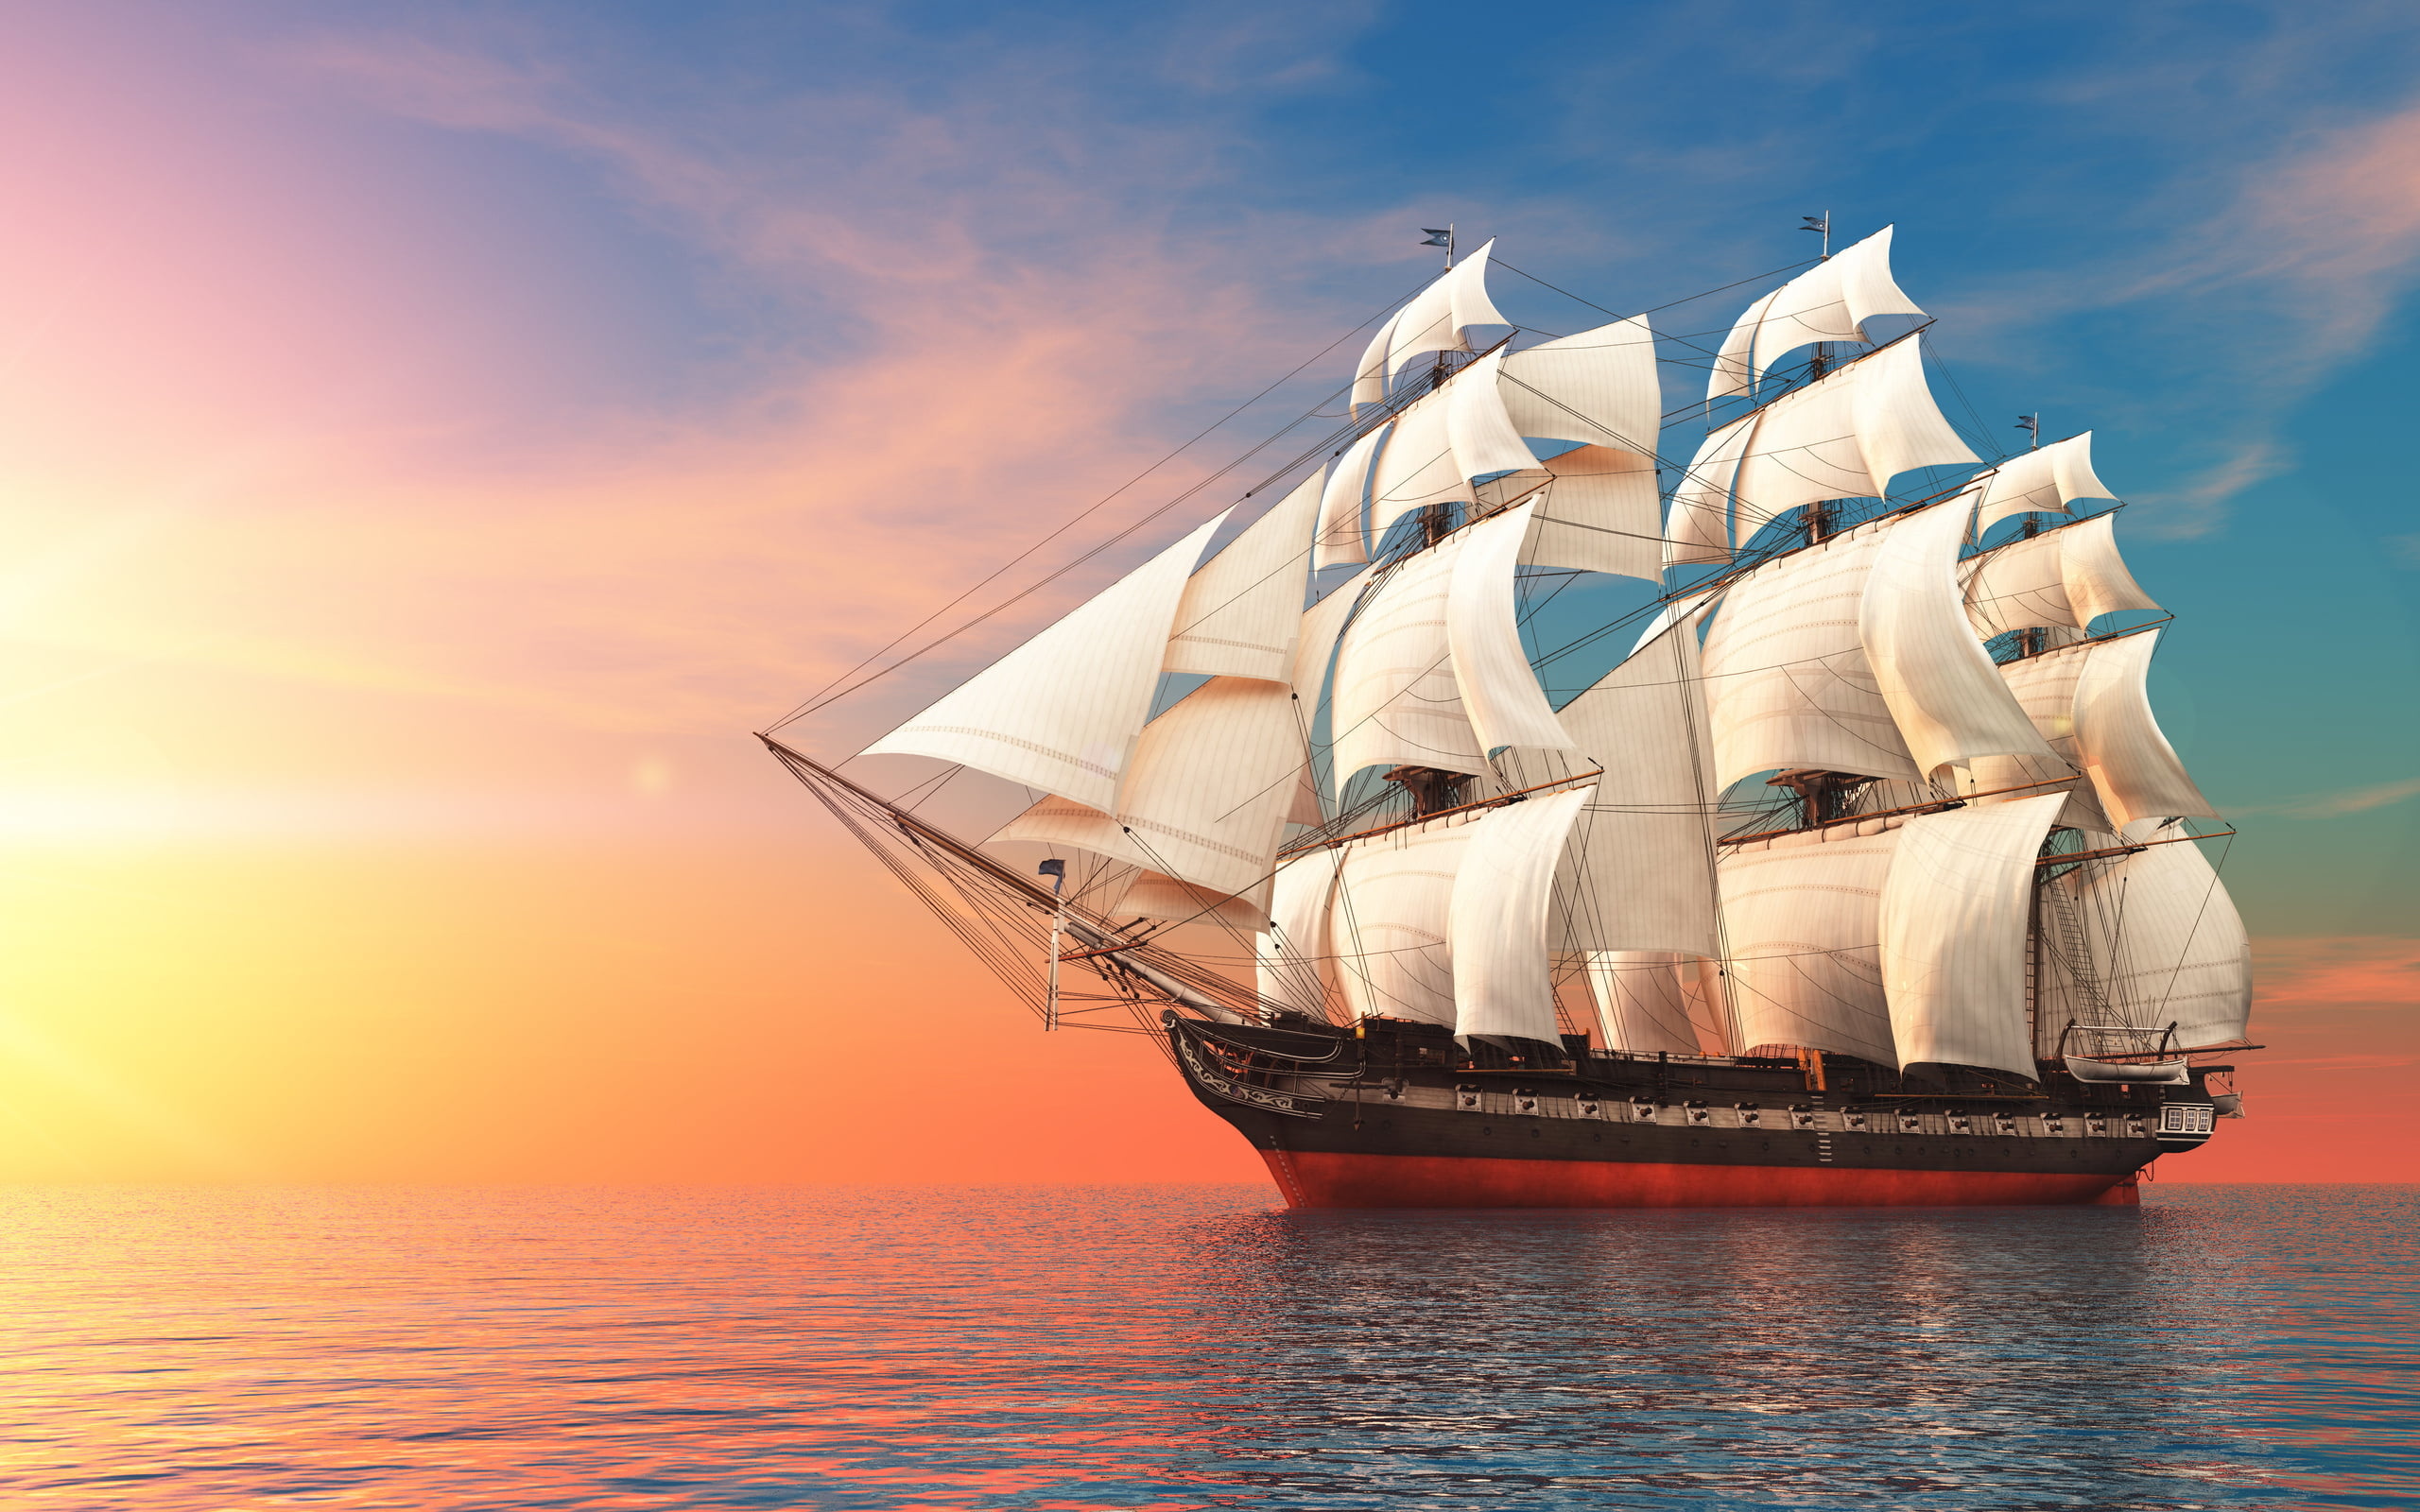 Schooner: Worked the Grand Banks of Newfoundland as the fishing vessels. 2560x1600 HD Wallpaper.